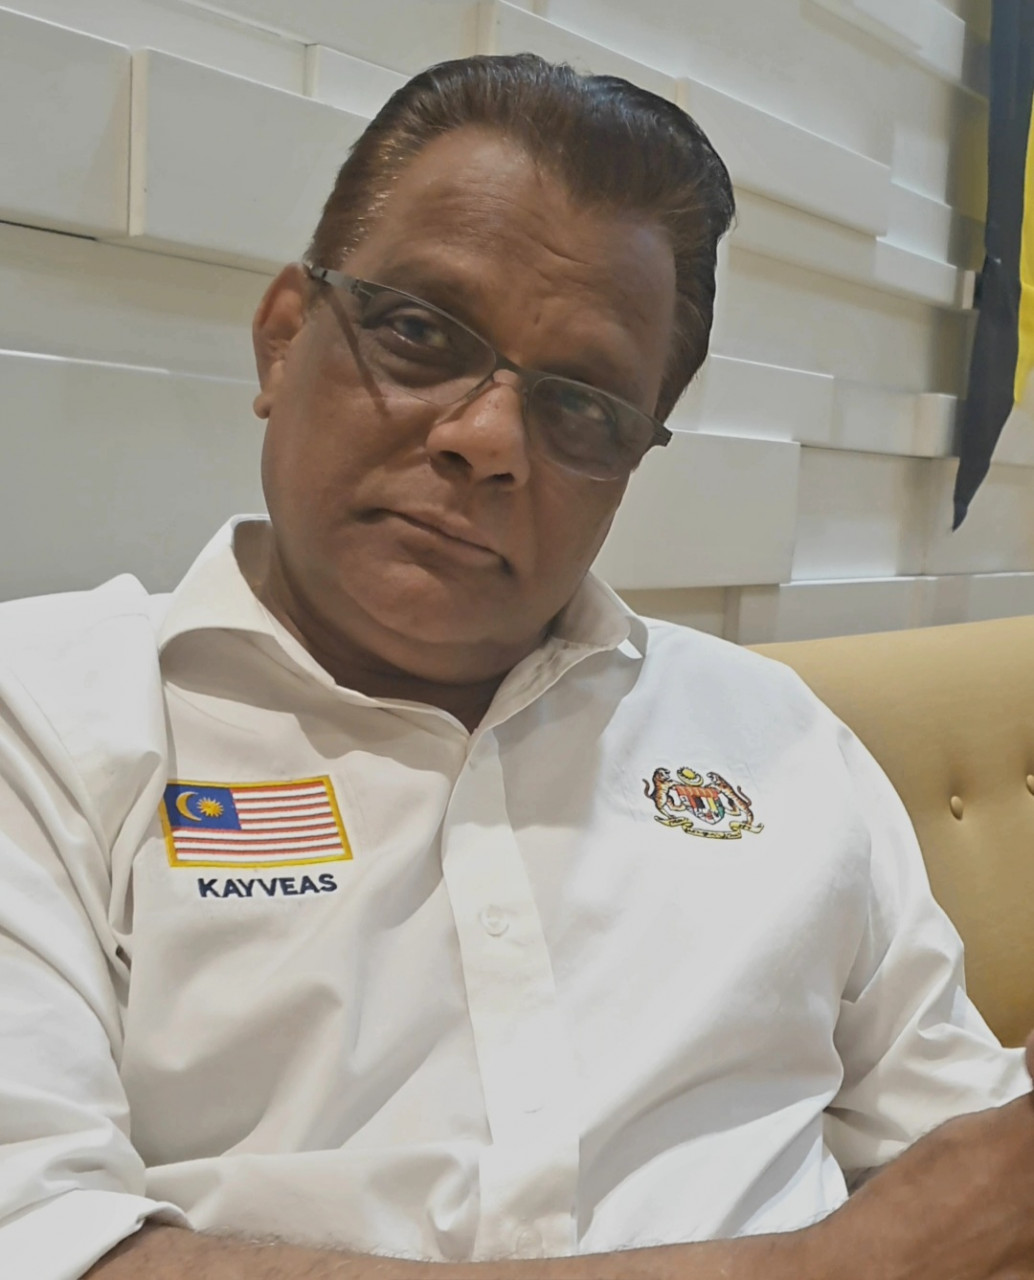 Tan Sri M. Kayveas, president of the suspended People’s Progressive Party, says he has declined invitations from several political parties to join them. – The Vibes pic, November 15, 2022